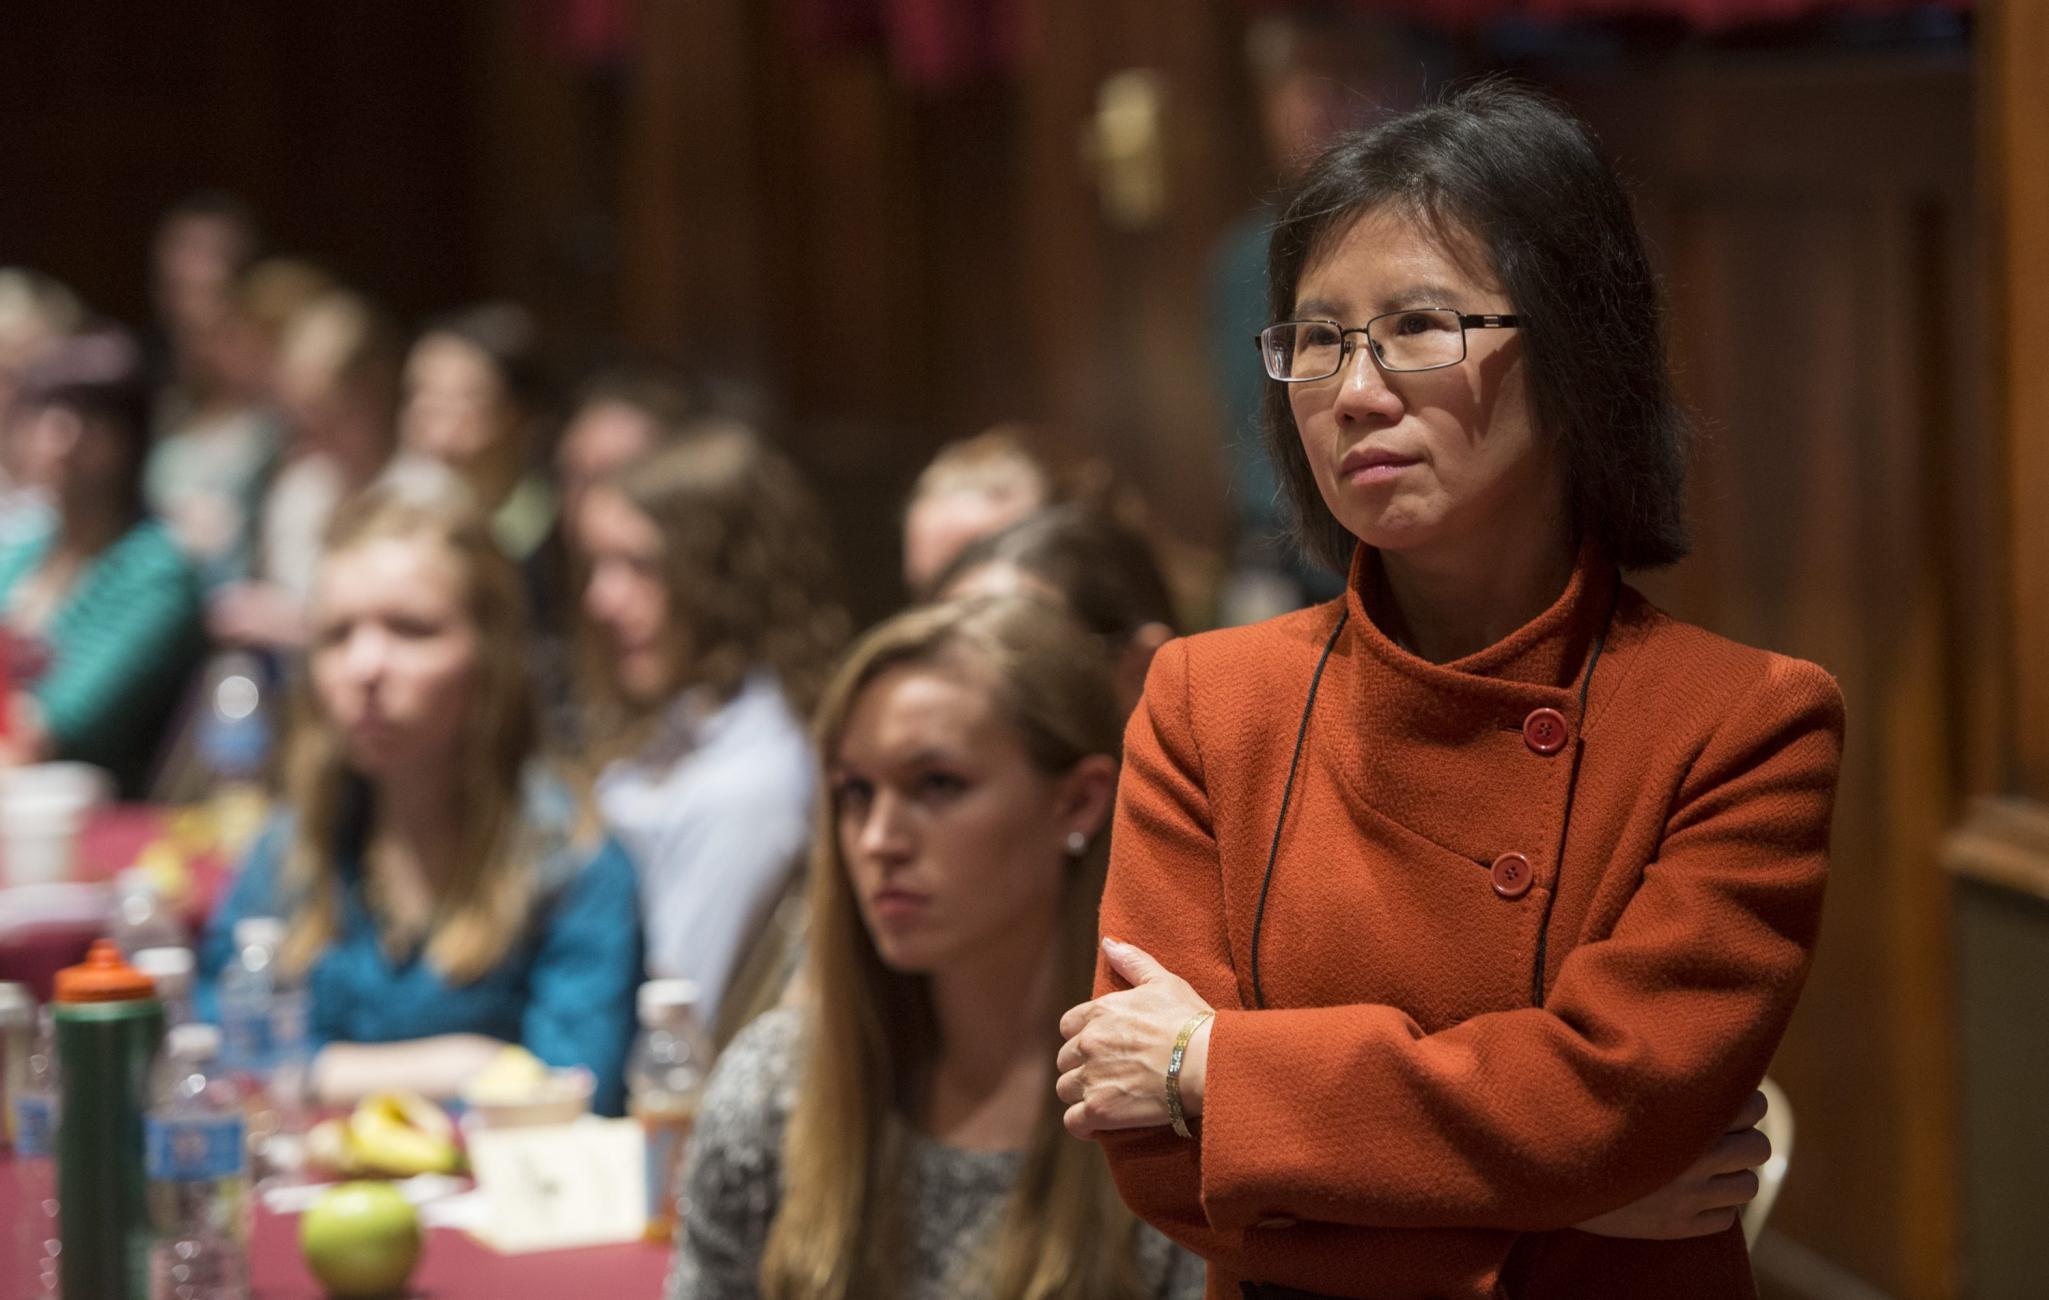 Young-Kee Kim organized the Midwest Conference for Undergraduate Women in Physics.